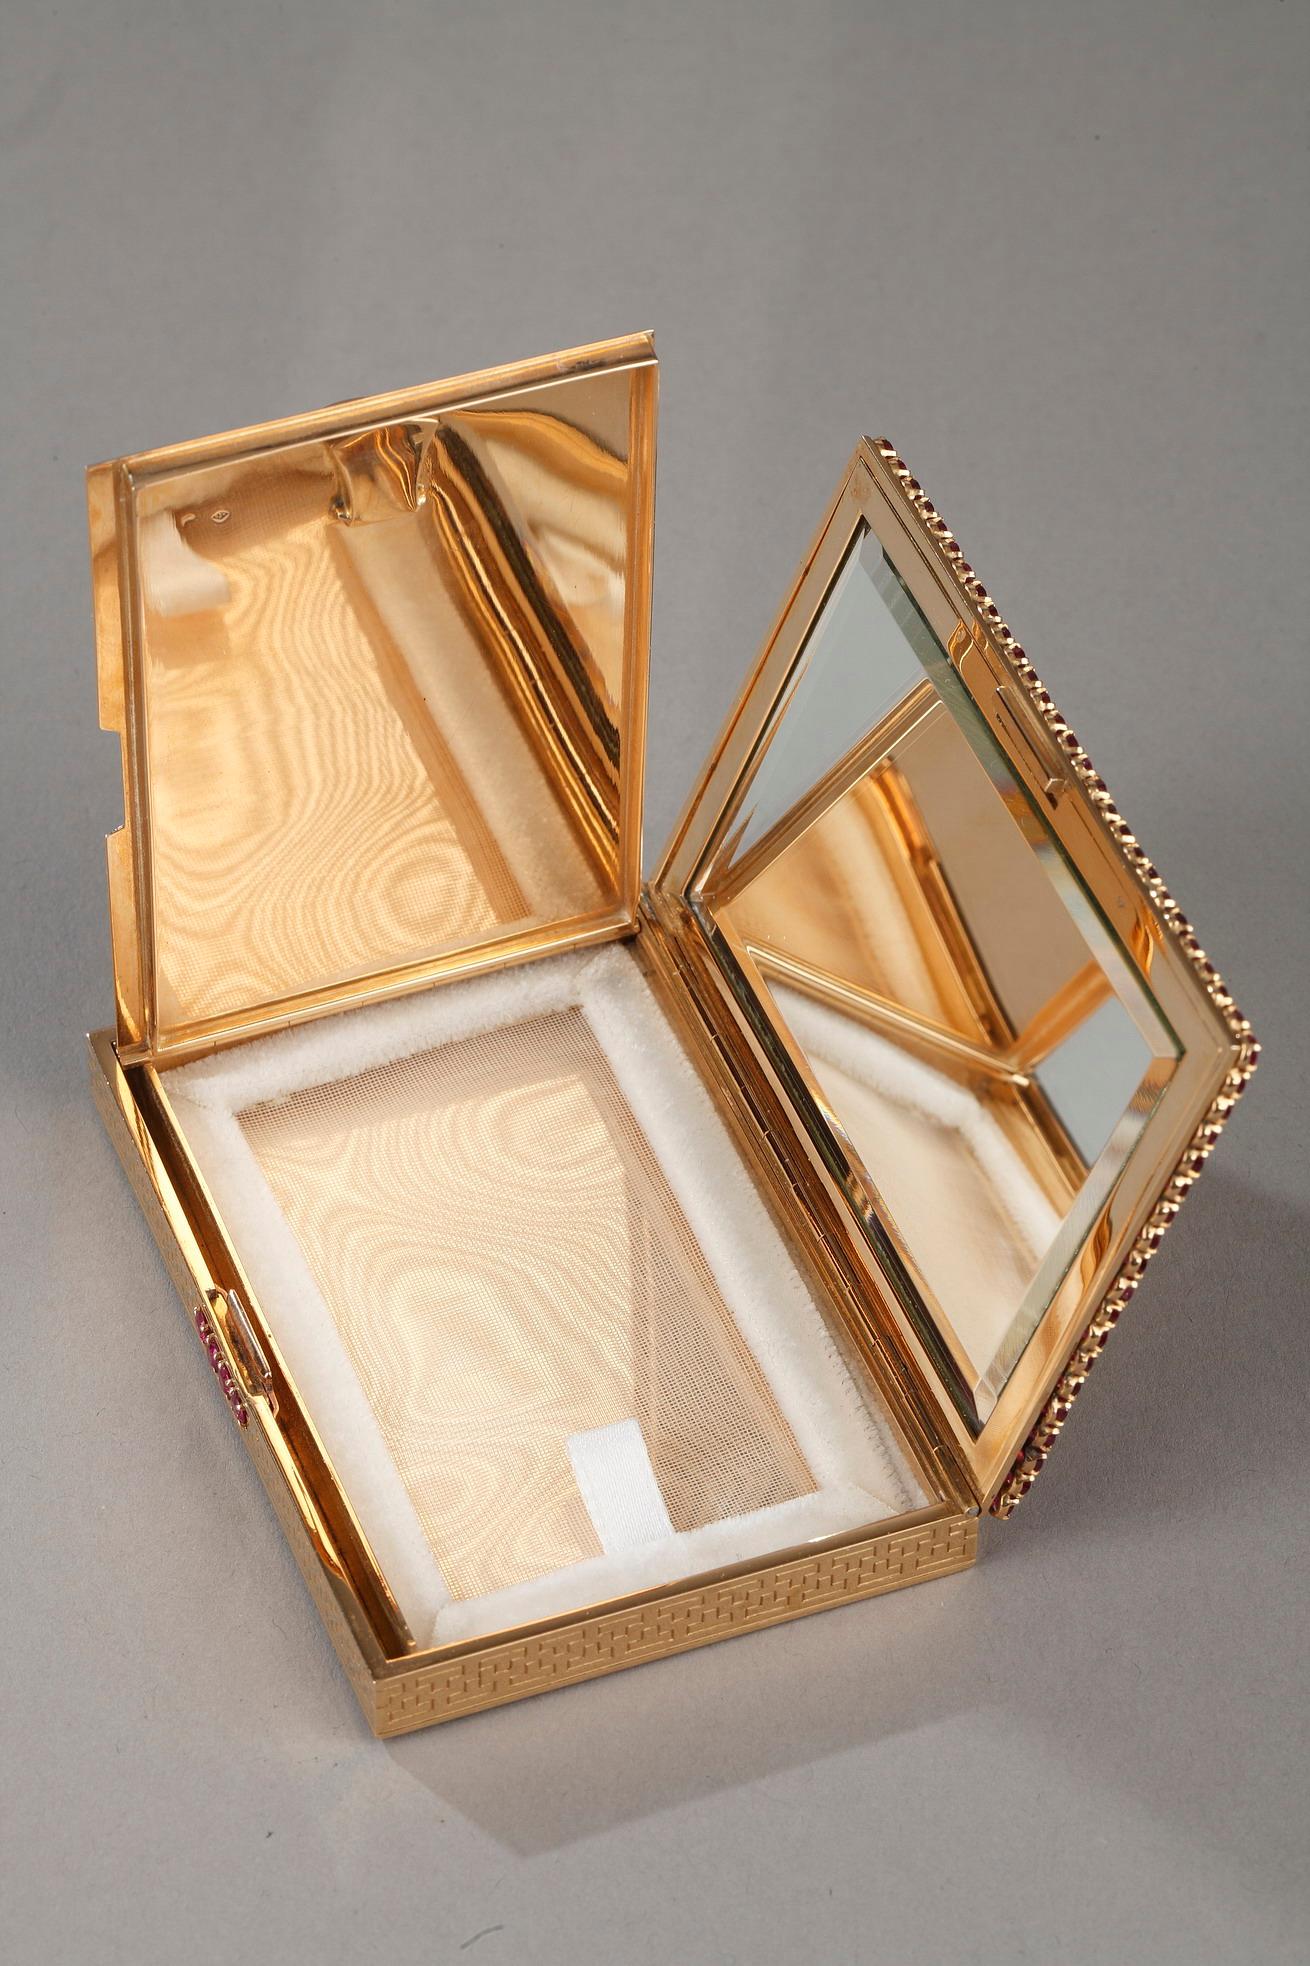 Gold and Rubis Compact, Art Deco For Sale 6